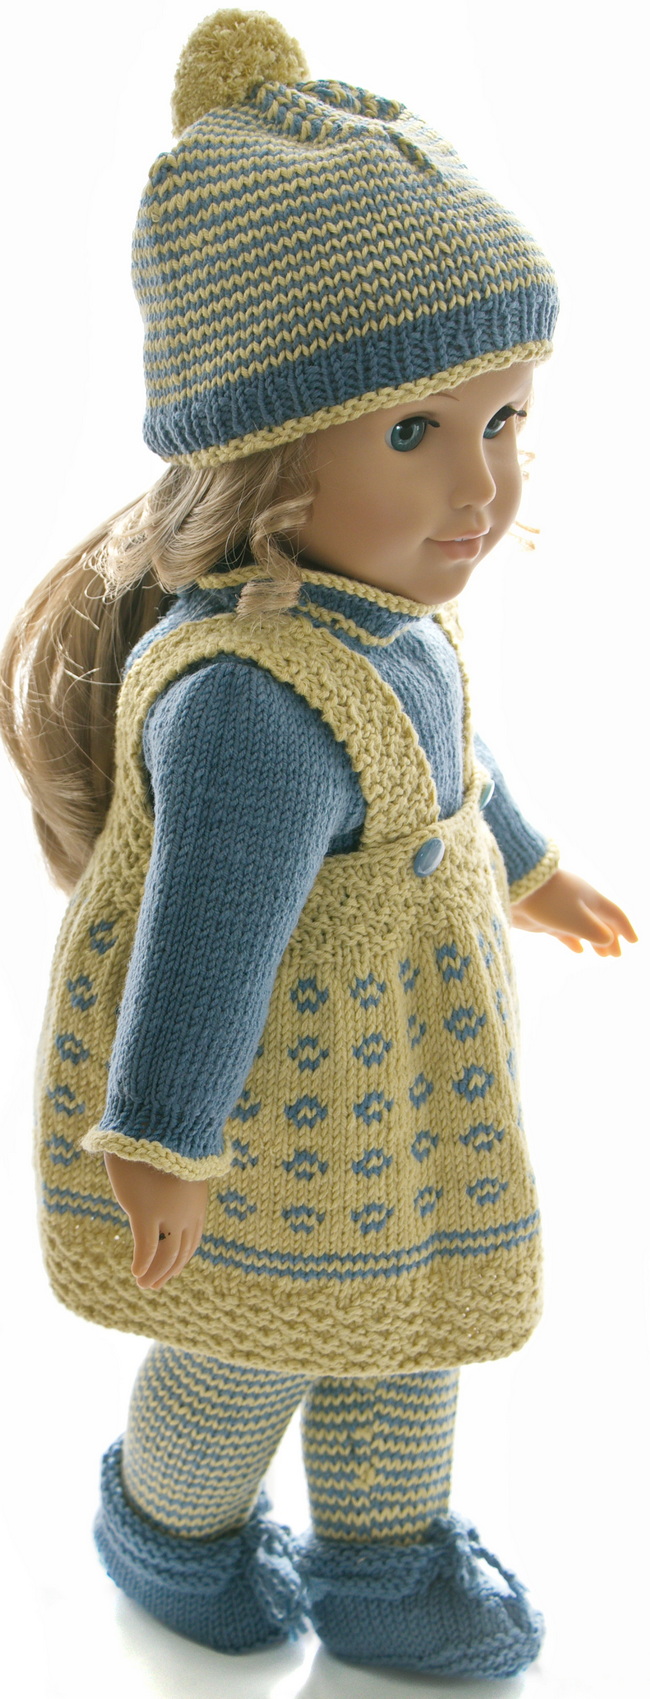 Lovely and charming clothes for a happy doll